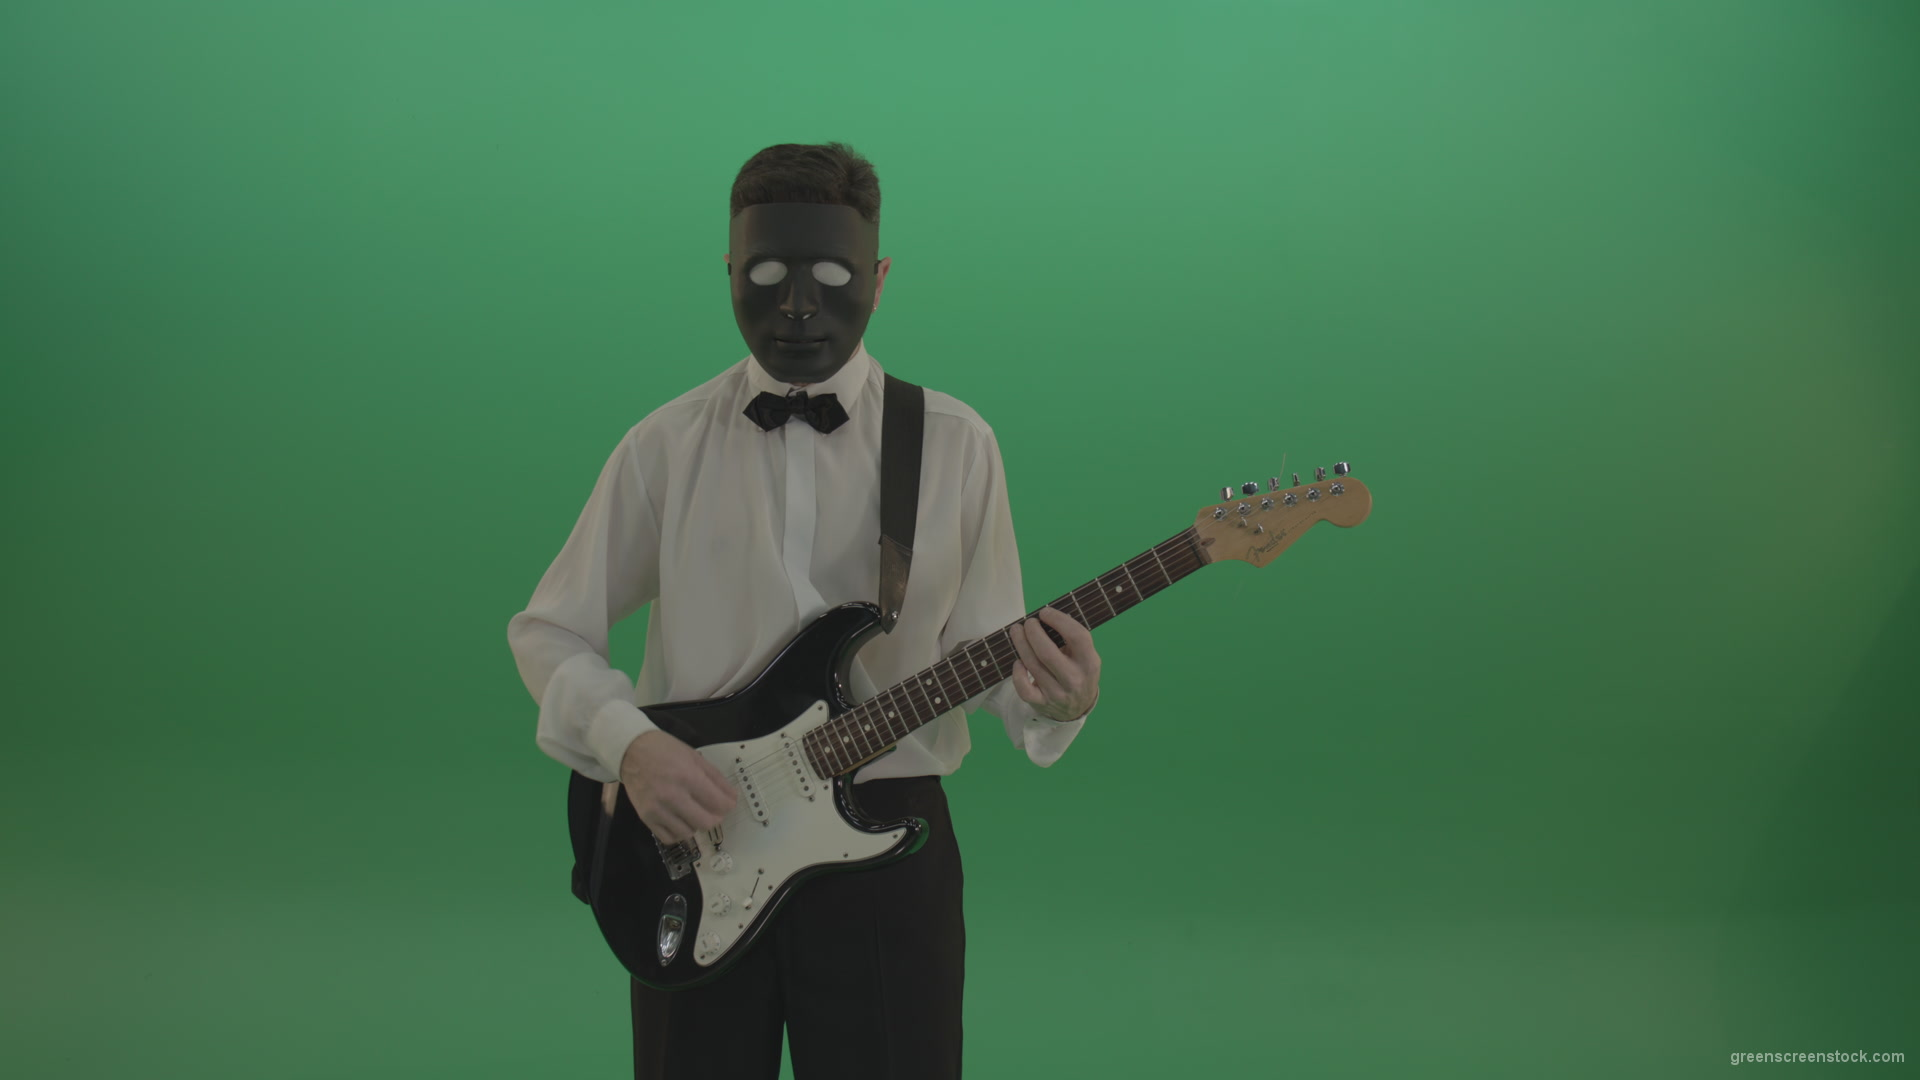 Horror-classic-guitarist-man-in-black-mask-and-white-shirt-play-guitar-on-green-screen_002 Green Screen Stock